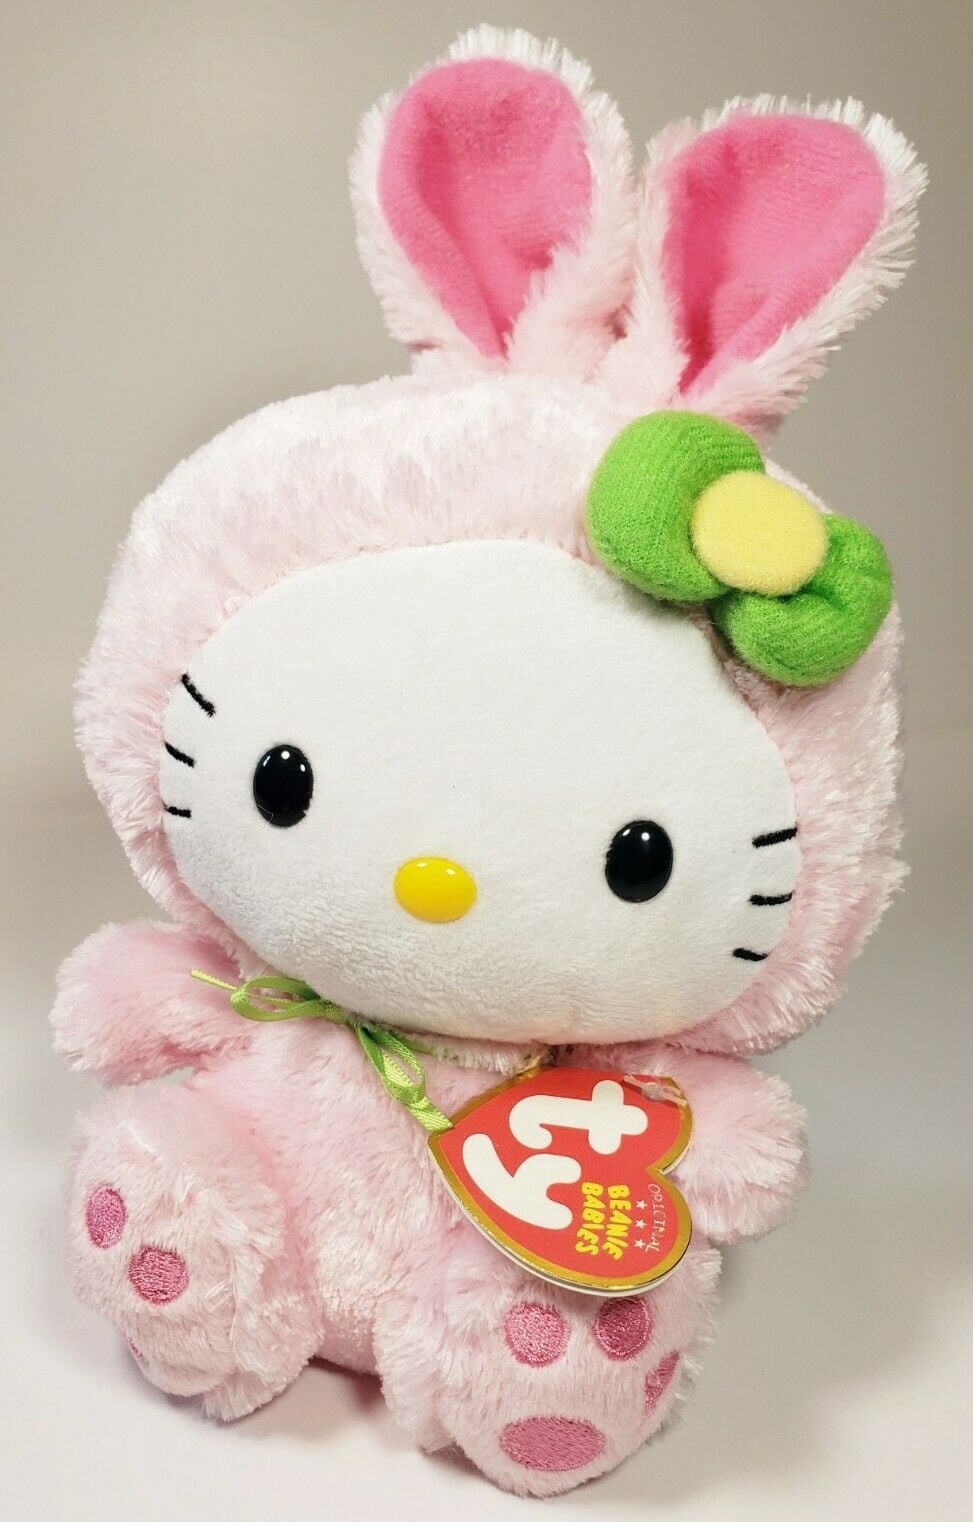 Ty 2011 Beanie Babies Sorbet Pink Bunny NWMT Retired Ship Easter #t38 for sale online 